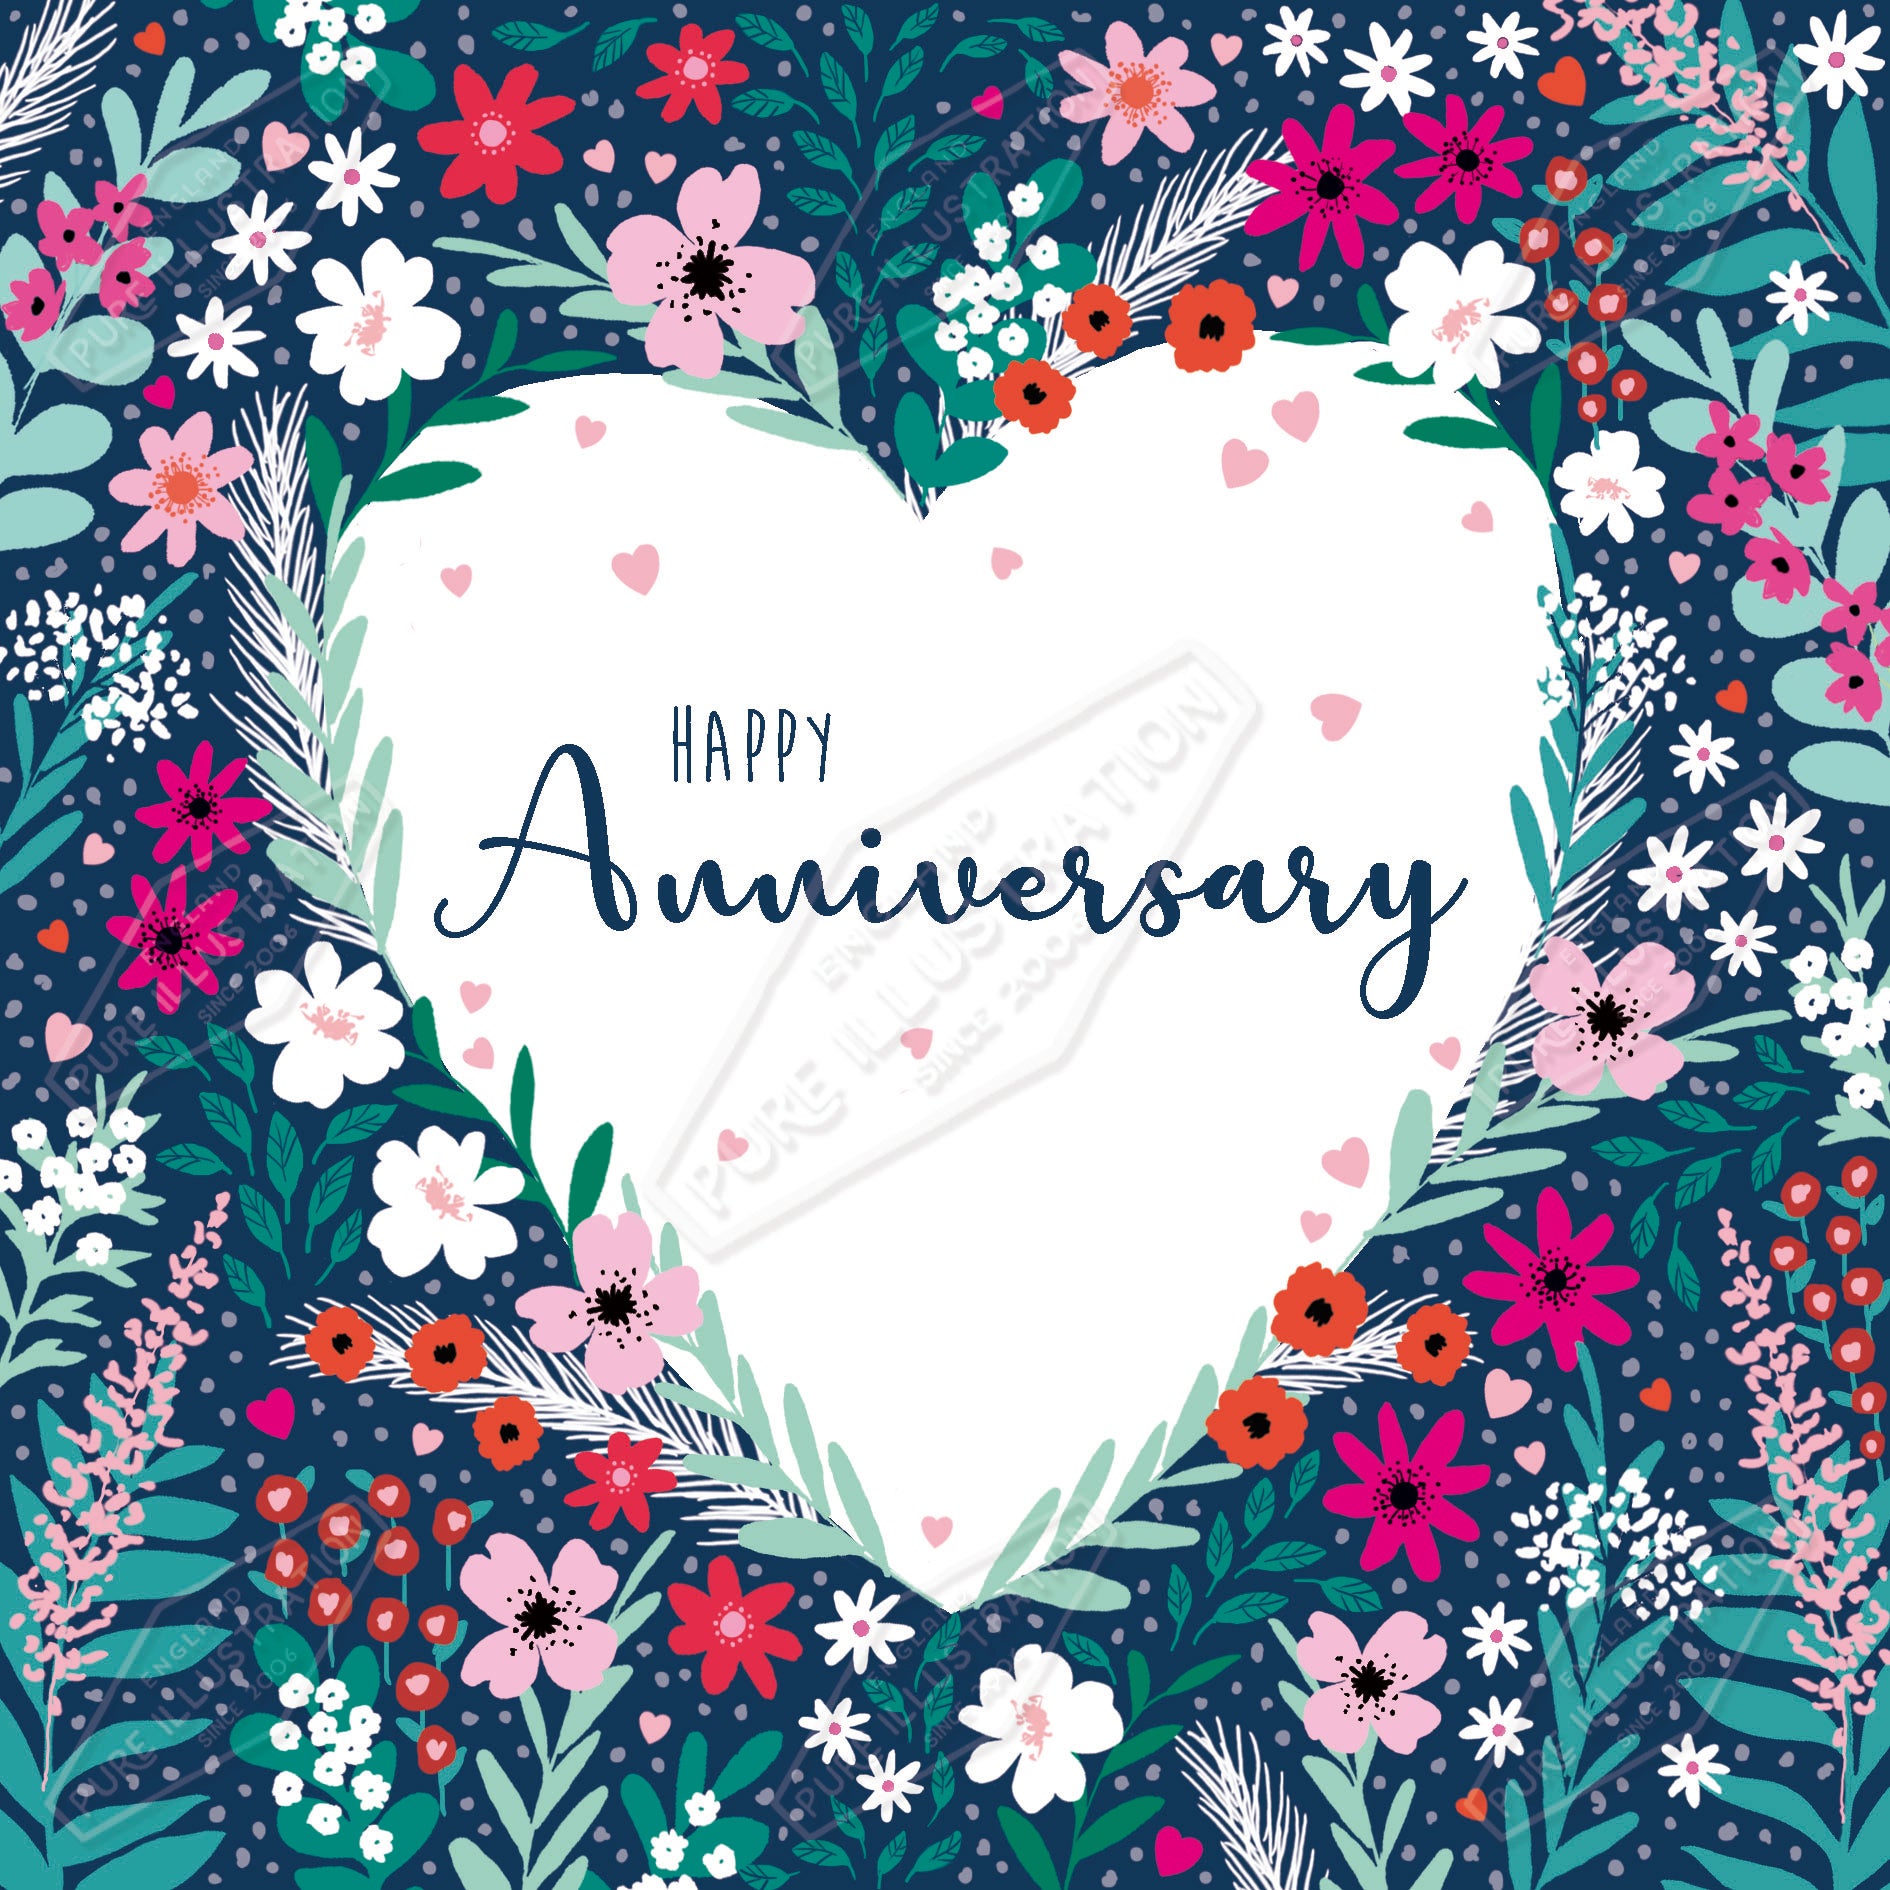 00035548CMI - Caitlin Miller is represented by Pure Art Licensing Agency - Anniversary Greeting Card Design